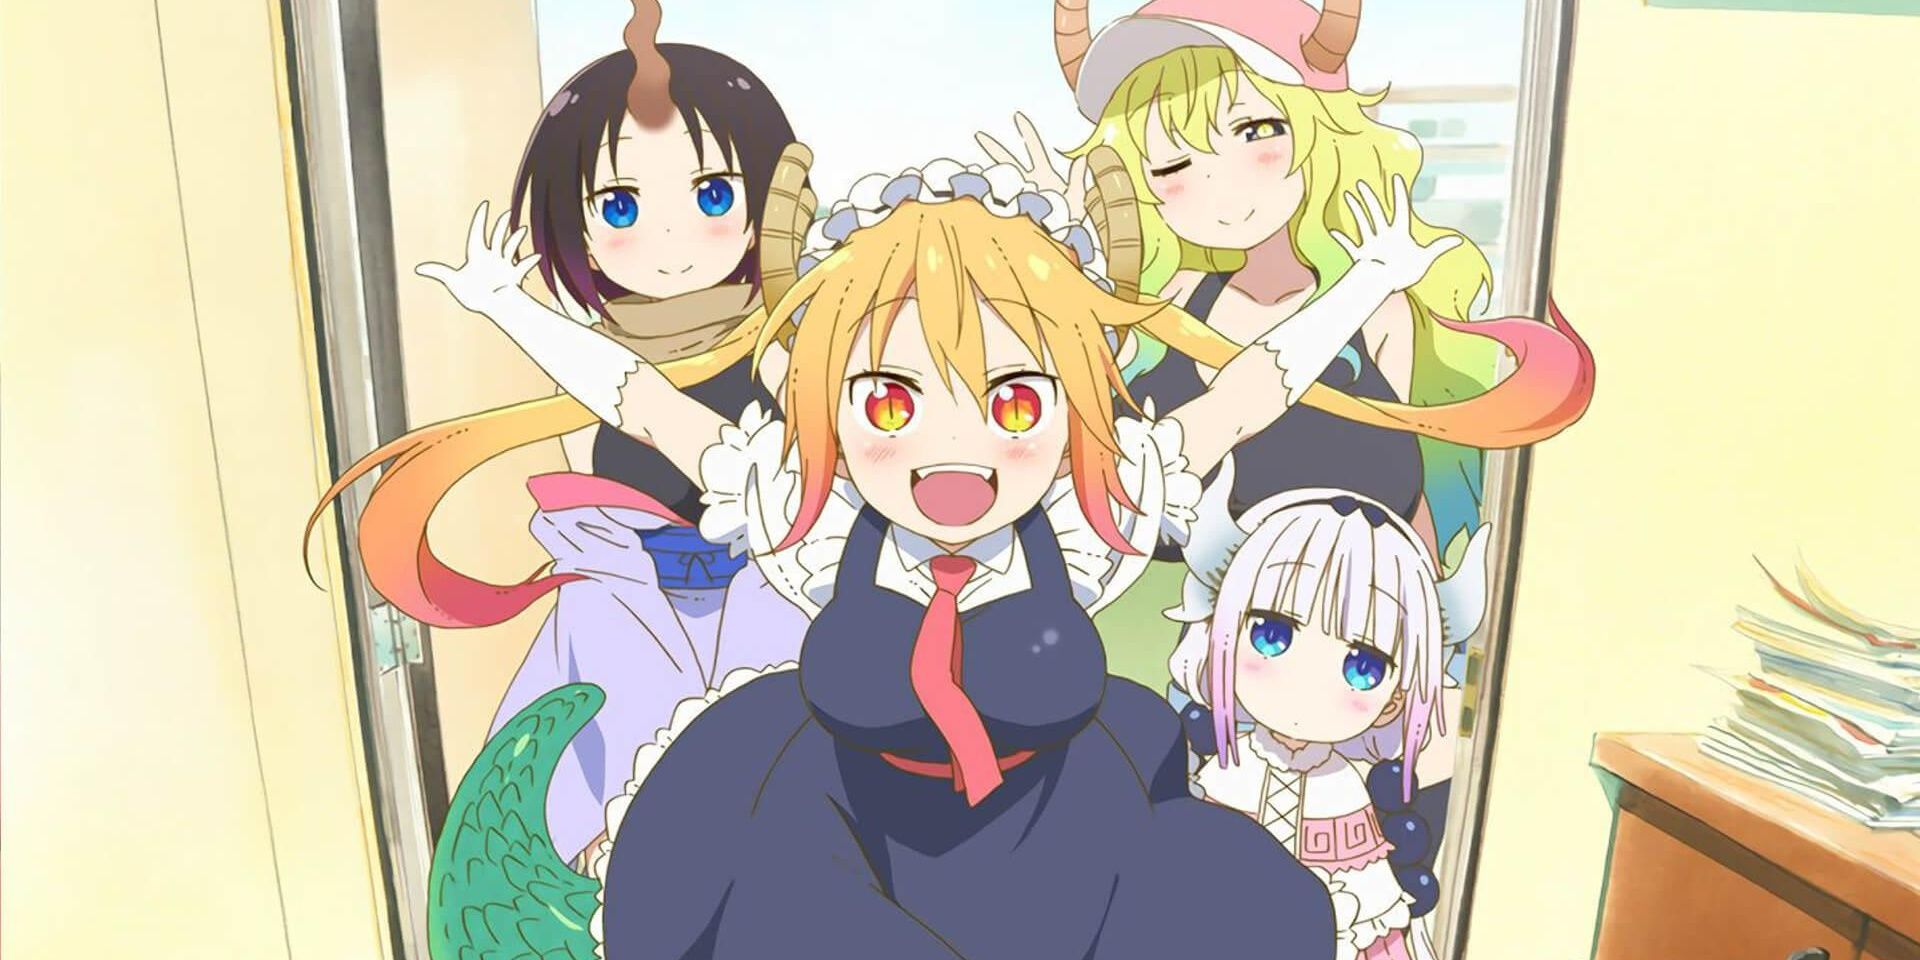 Cthe ast of Miss Kobayashi's Dragon Maid, with Tohru at the lead